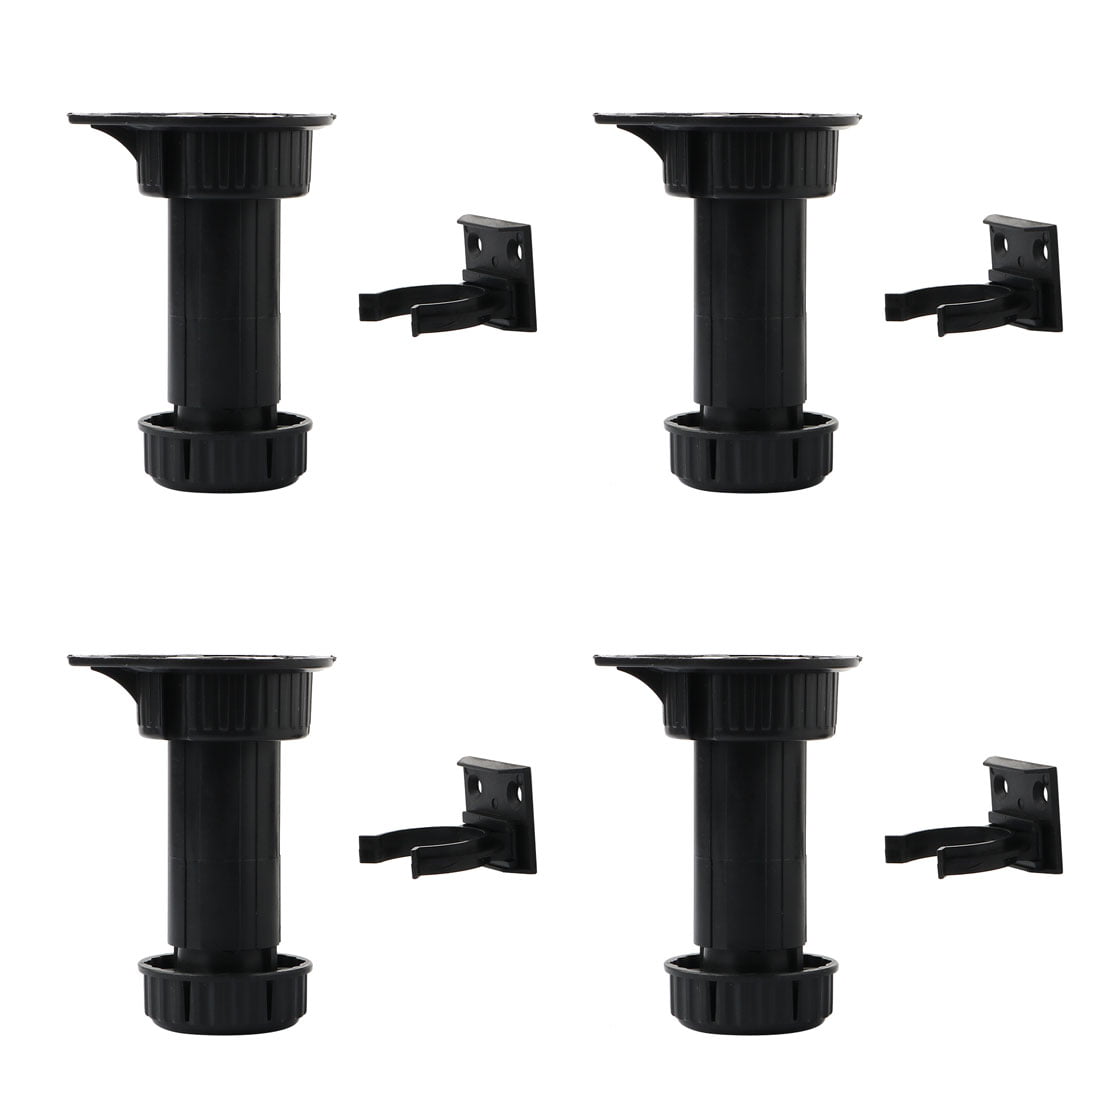 Adjustable Feet for Baseboard Legs M6 Pack of 4 